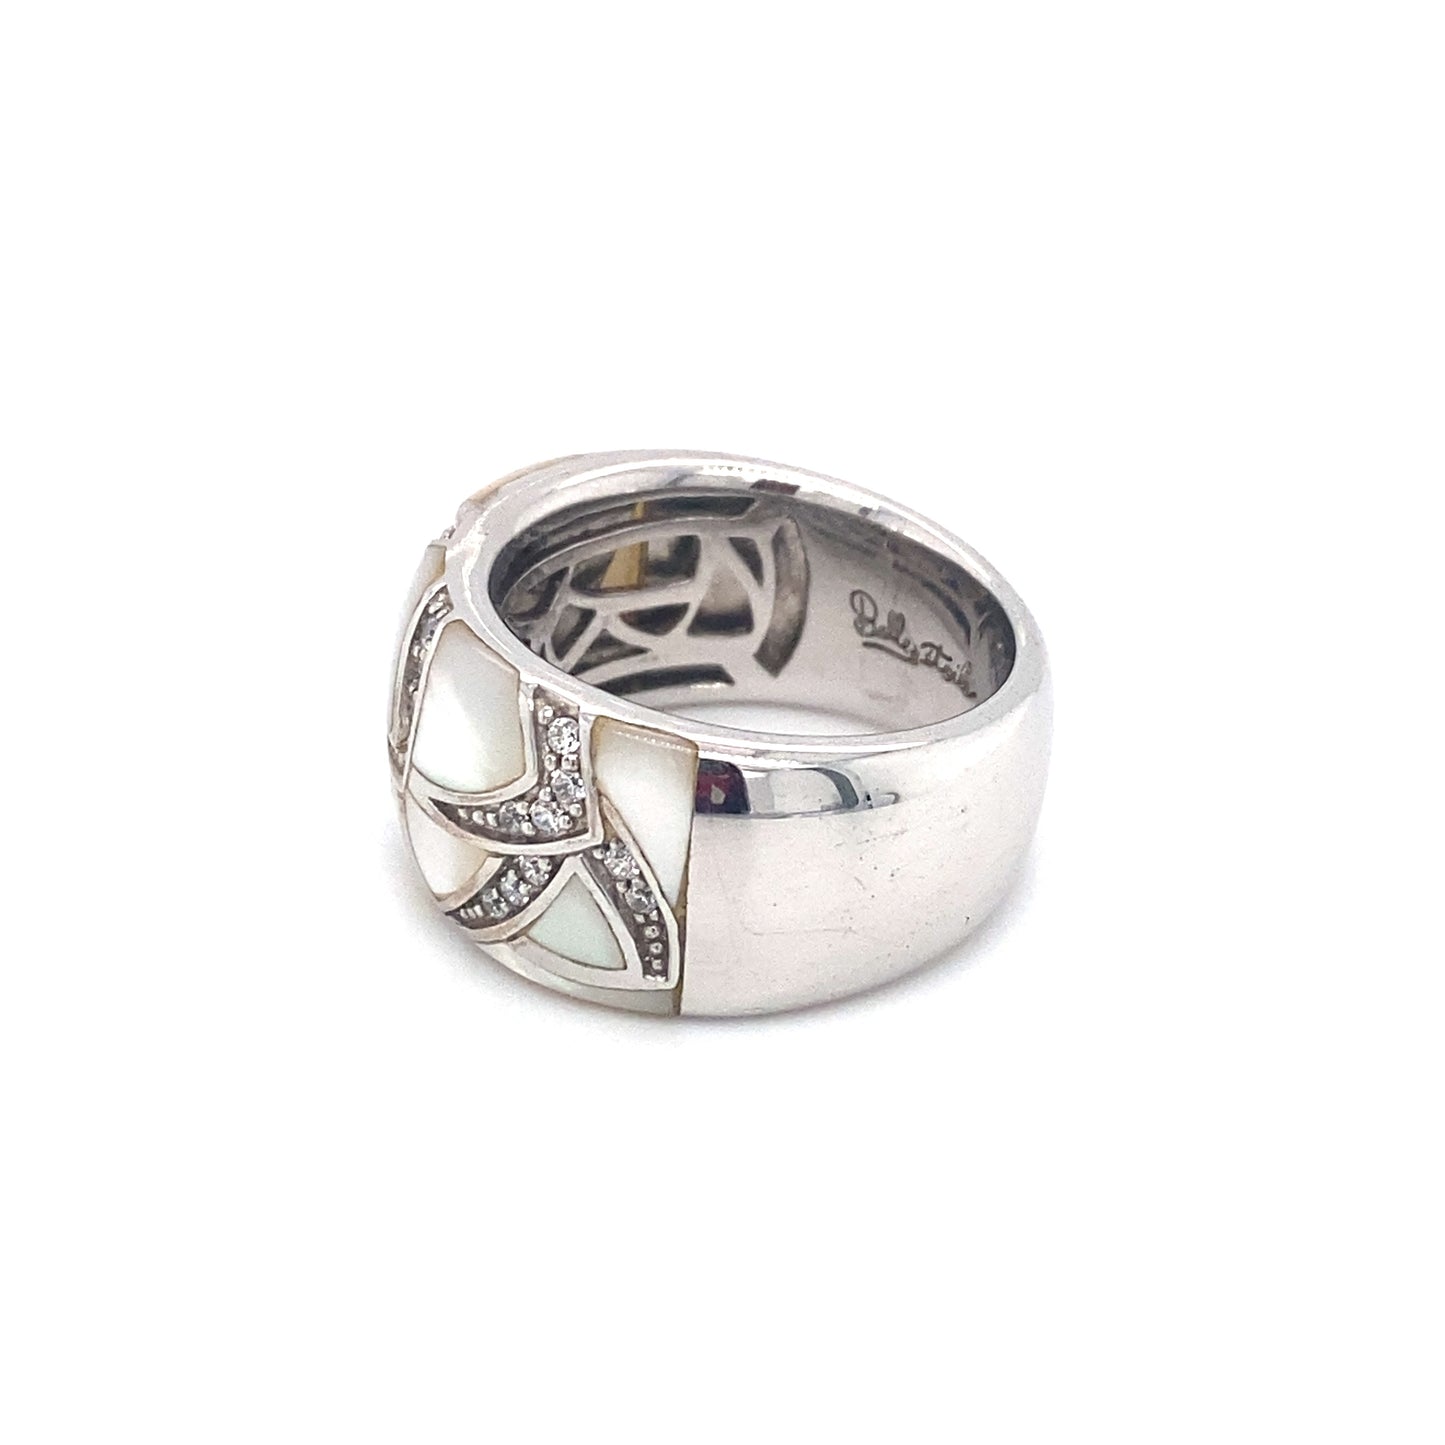 Belle Etoile "Sirena" Mother of Pearl Band in Sterling Silver